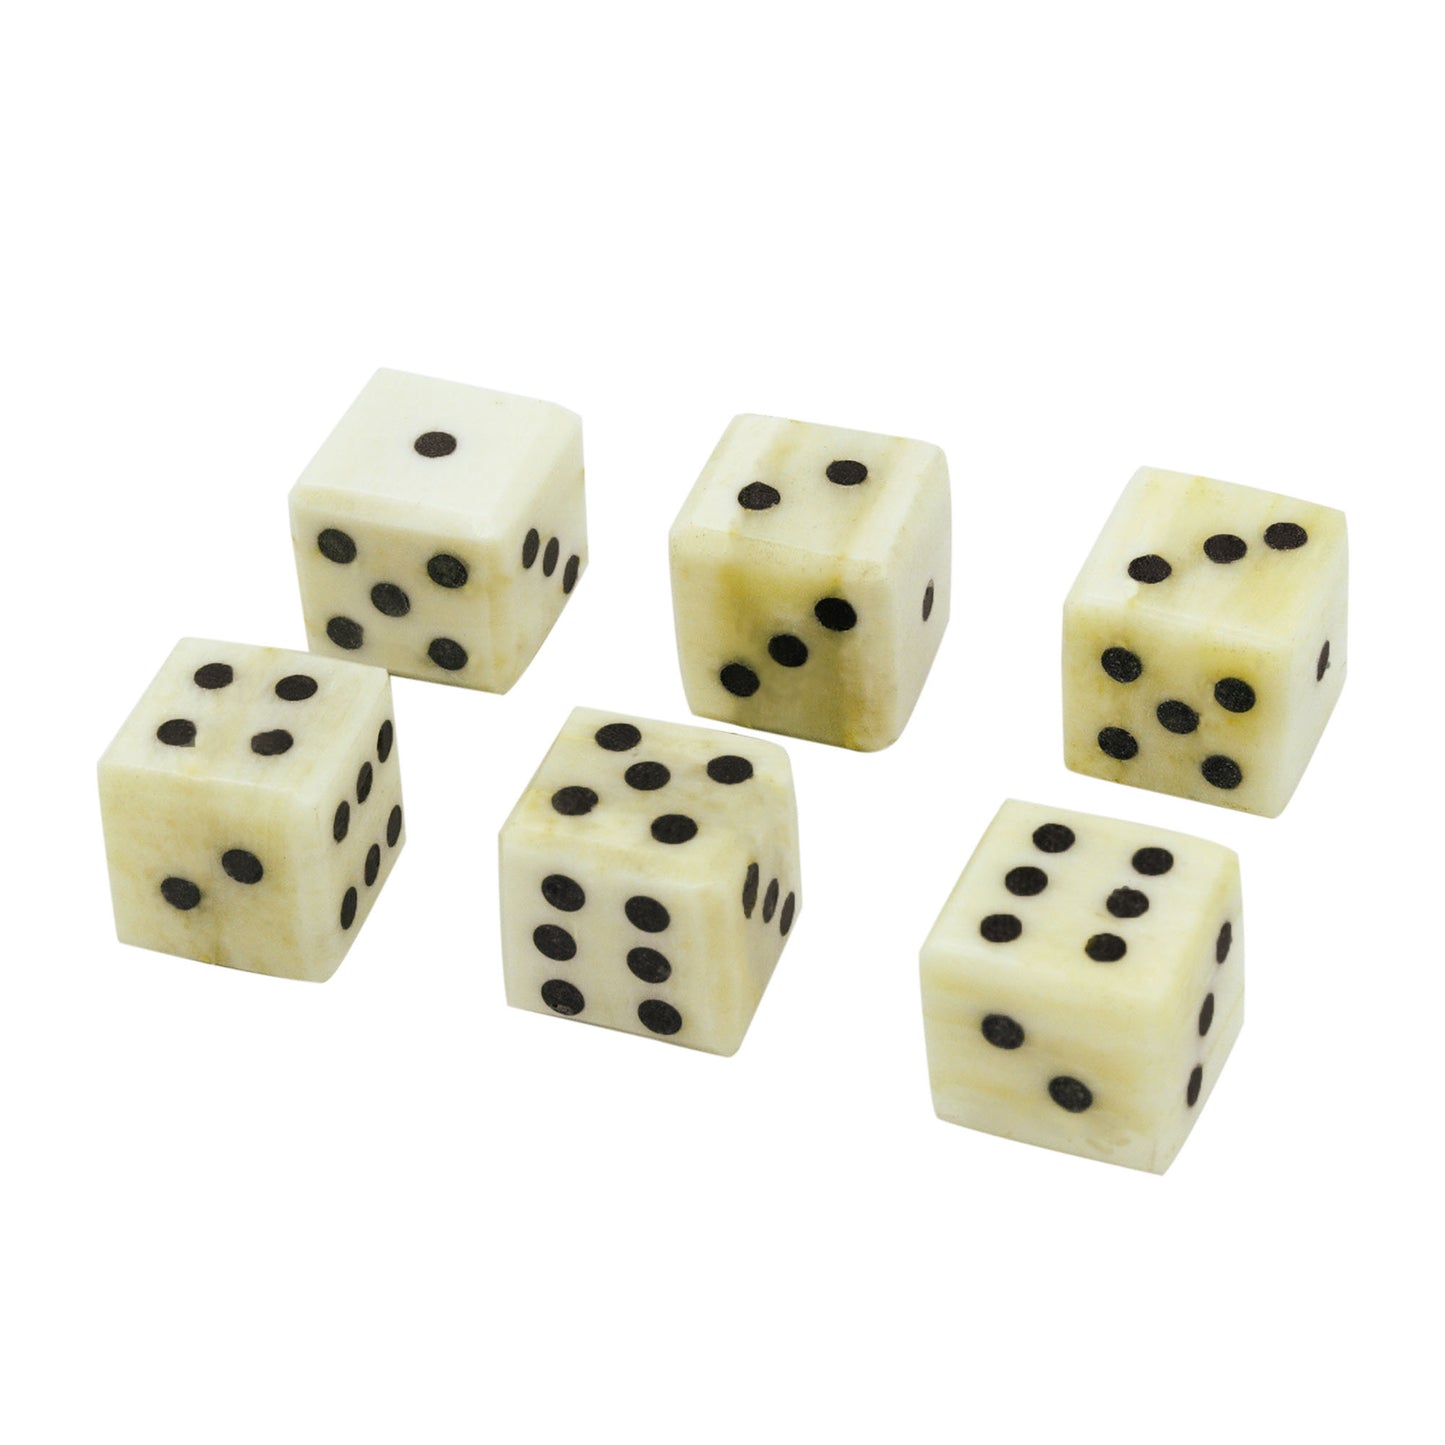 Medieval Bone Dice with solid pips (set of 6)